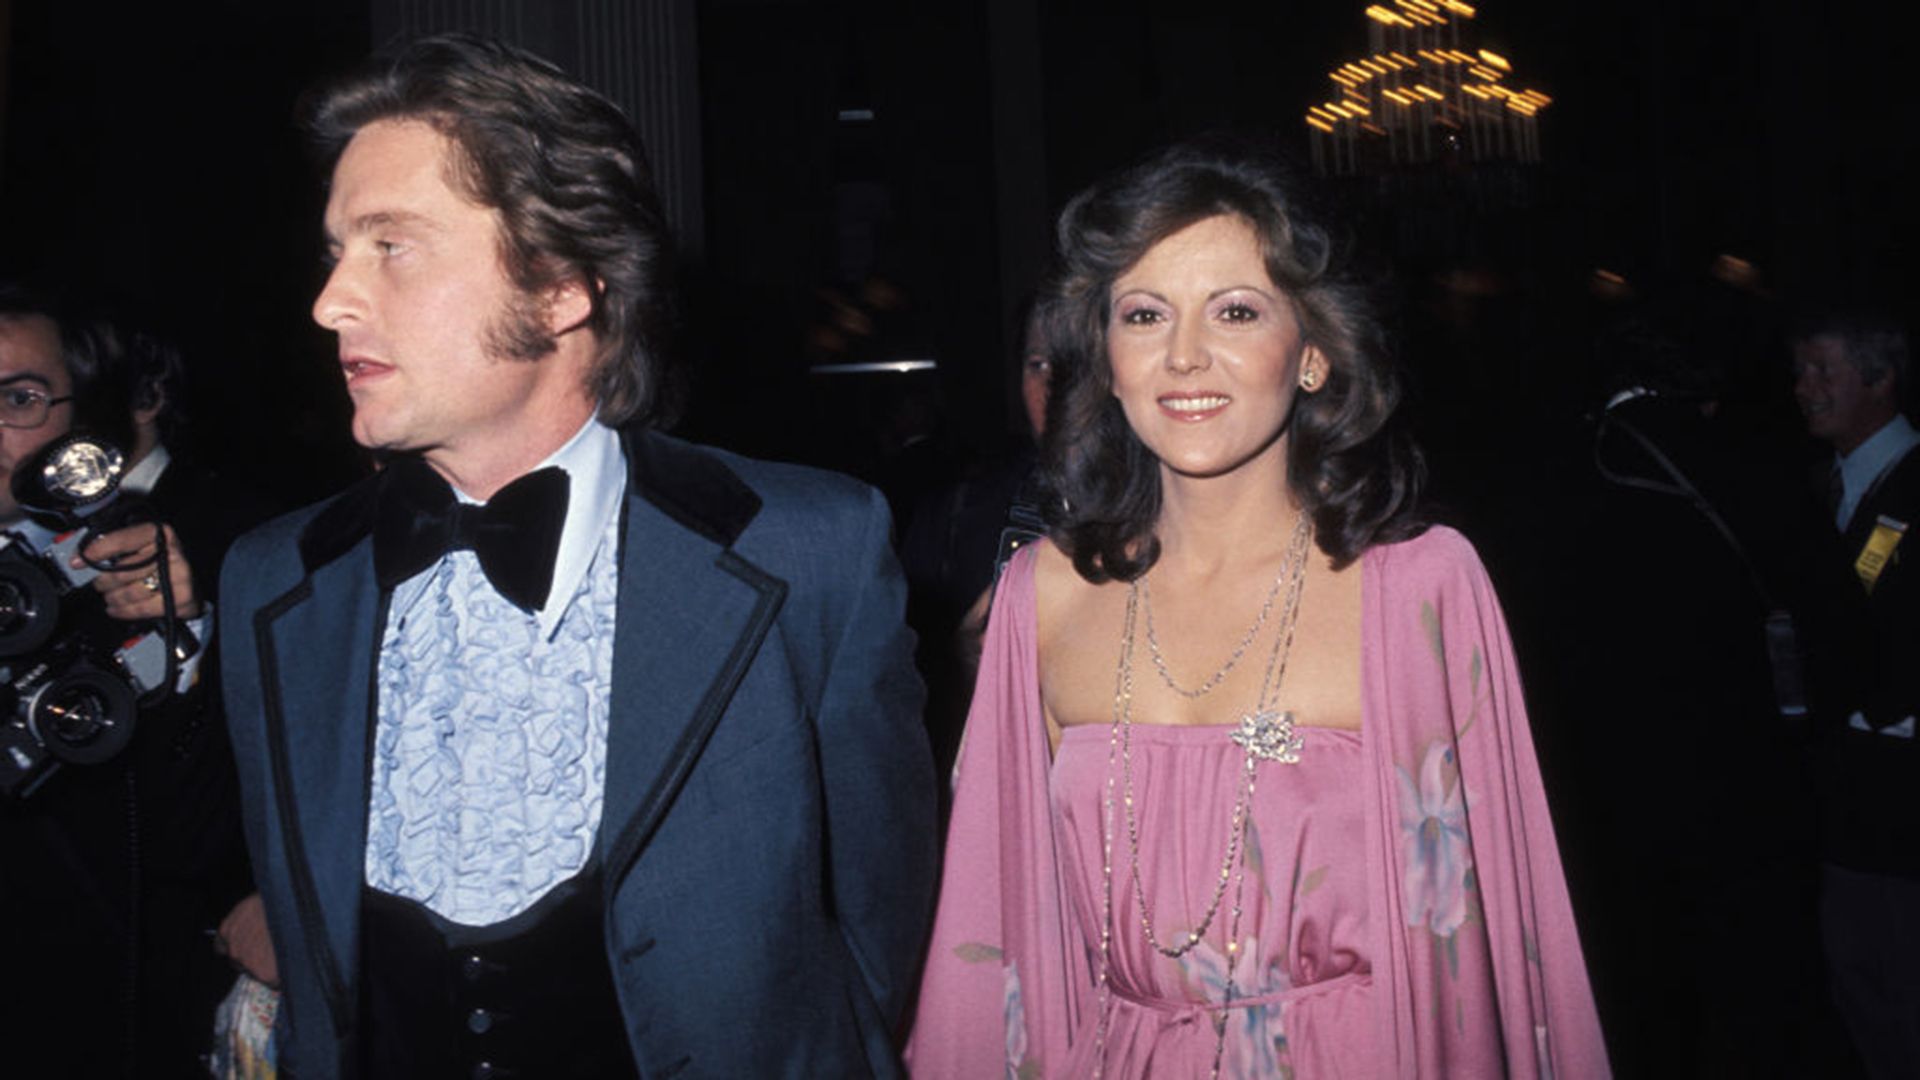 Michael Douglas in a blue tuxedo and Brenda Vaccaro in a pink dress 